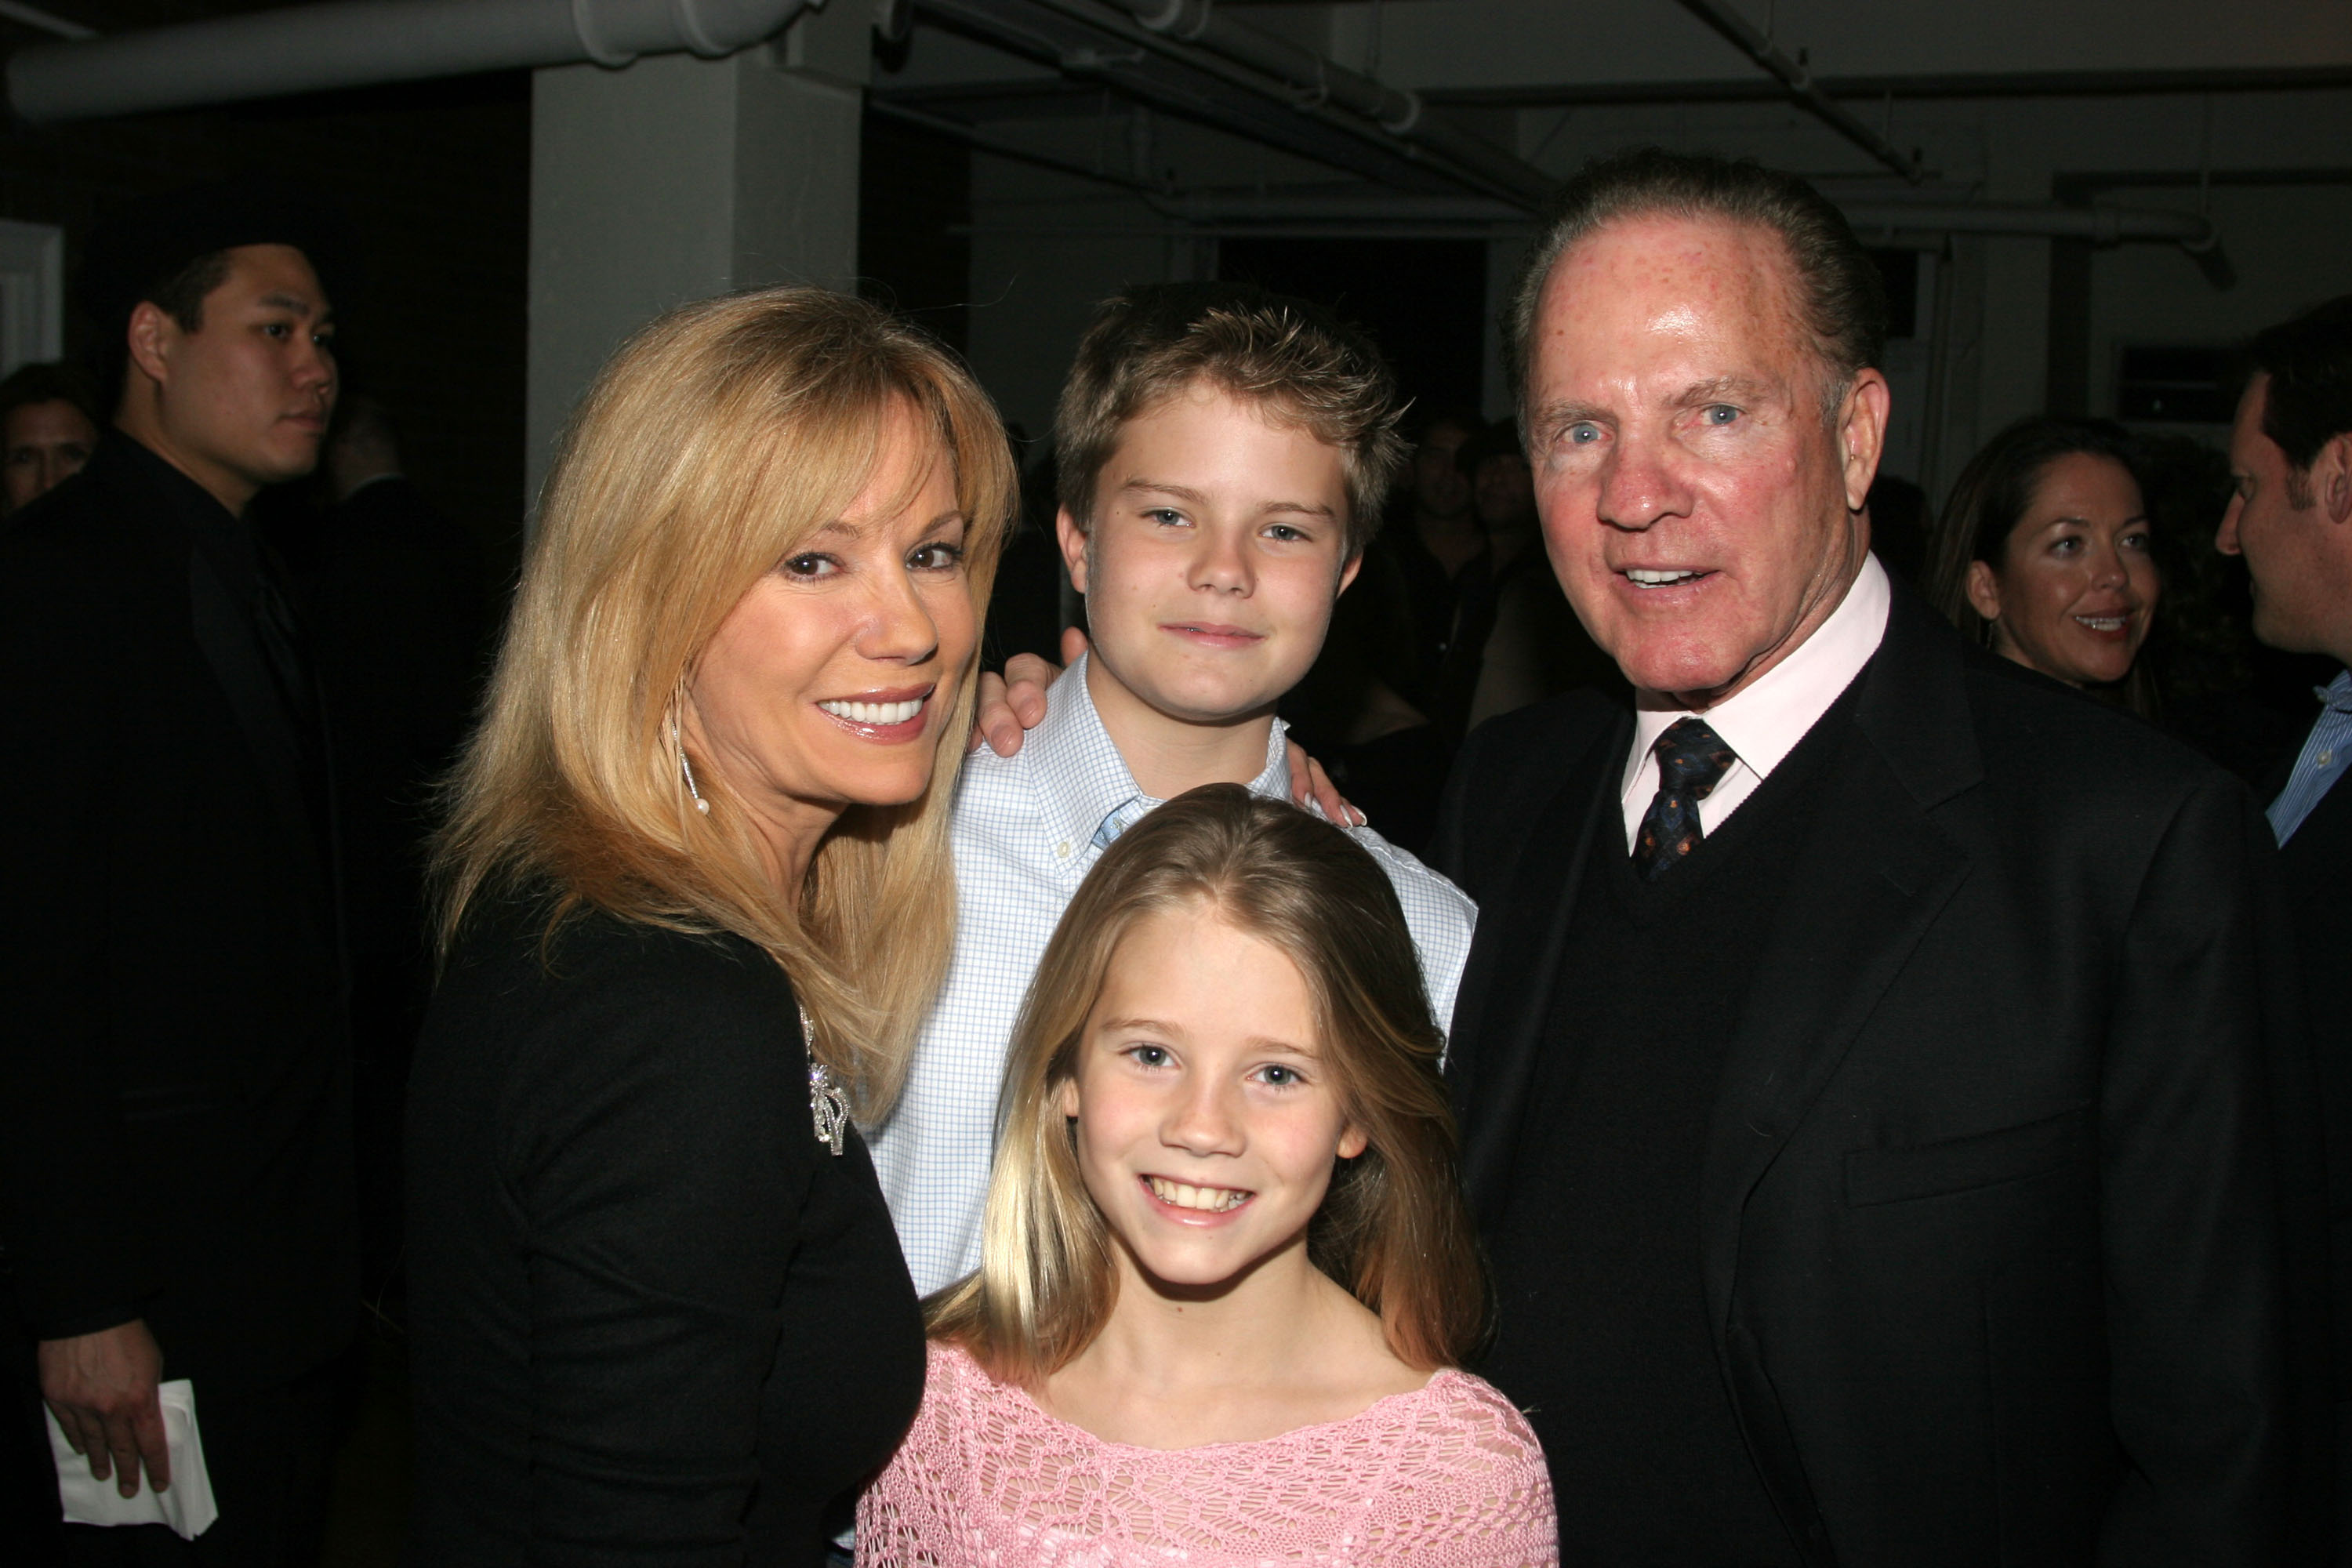 Kathie Lee Gifford, Cody and Cassidy and Frank Gifford at opening night of Kathie's musical "Under the Bridge" | Source: Getty Images